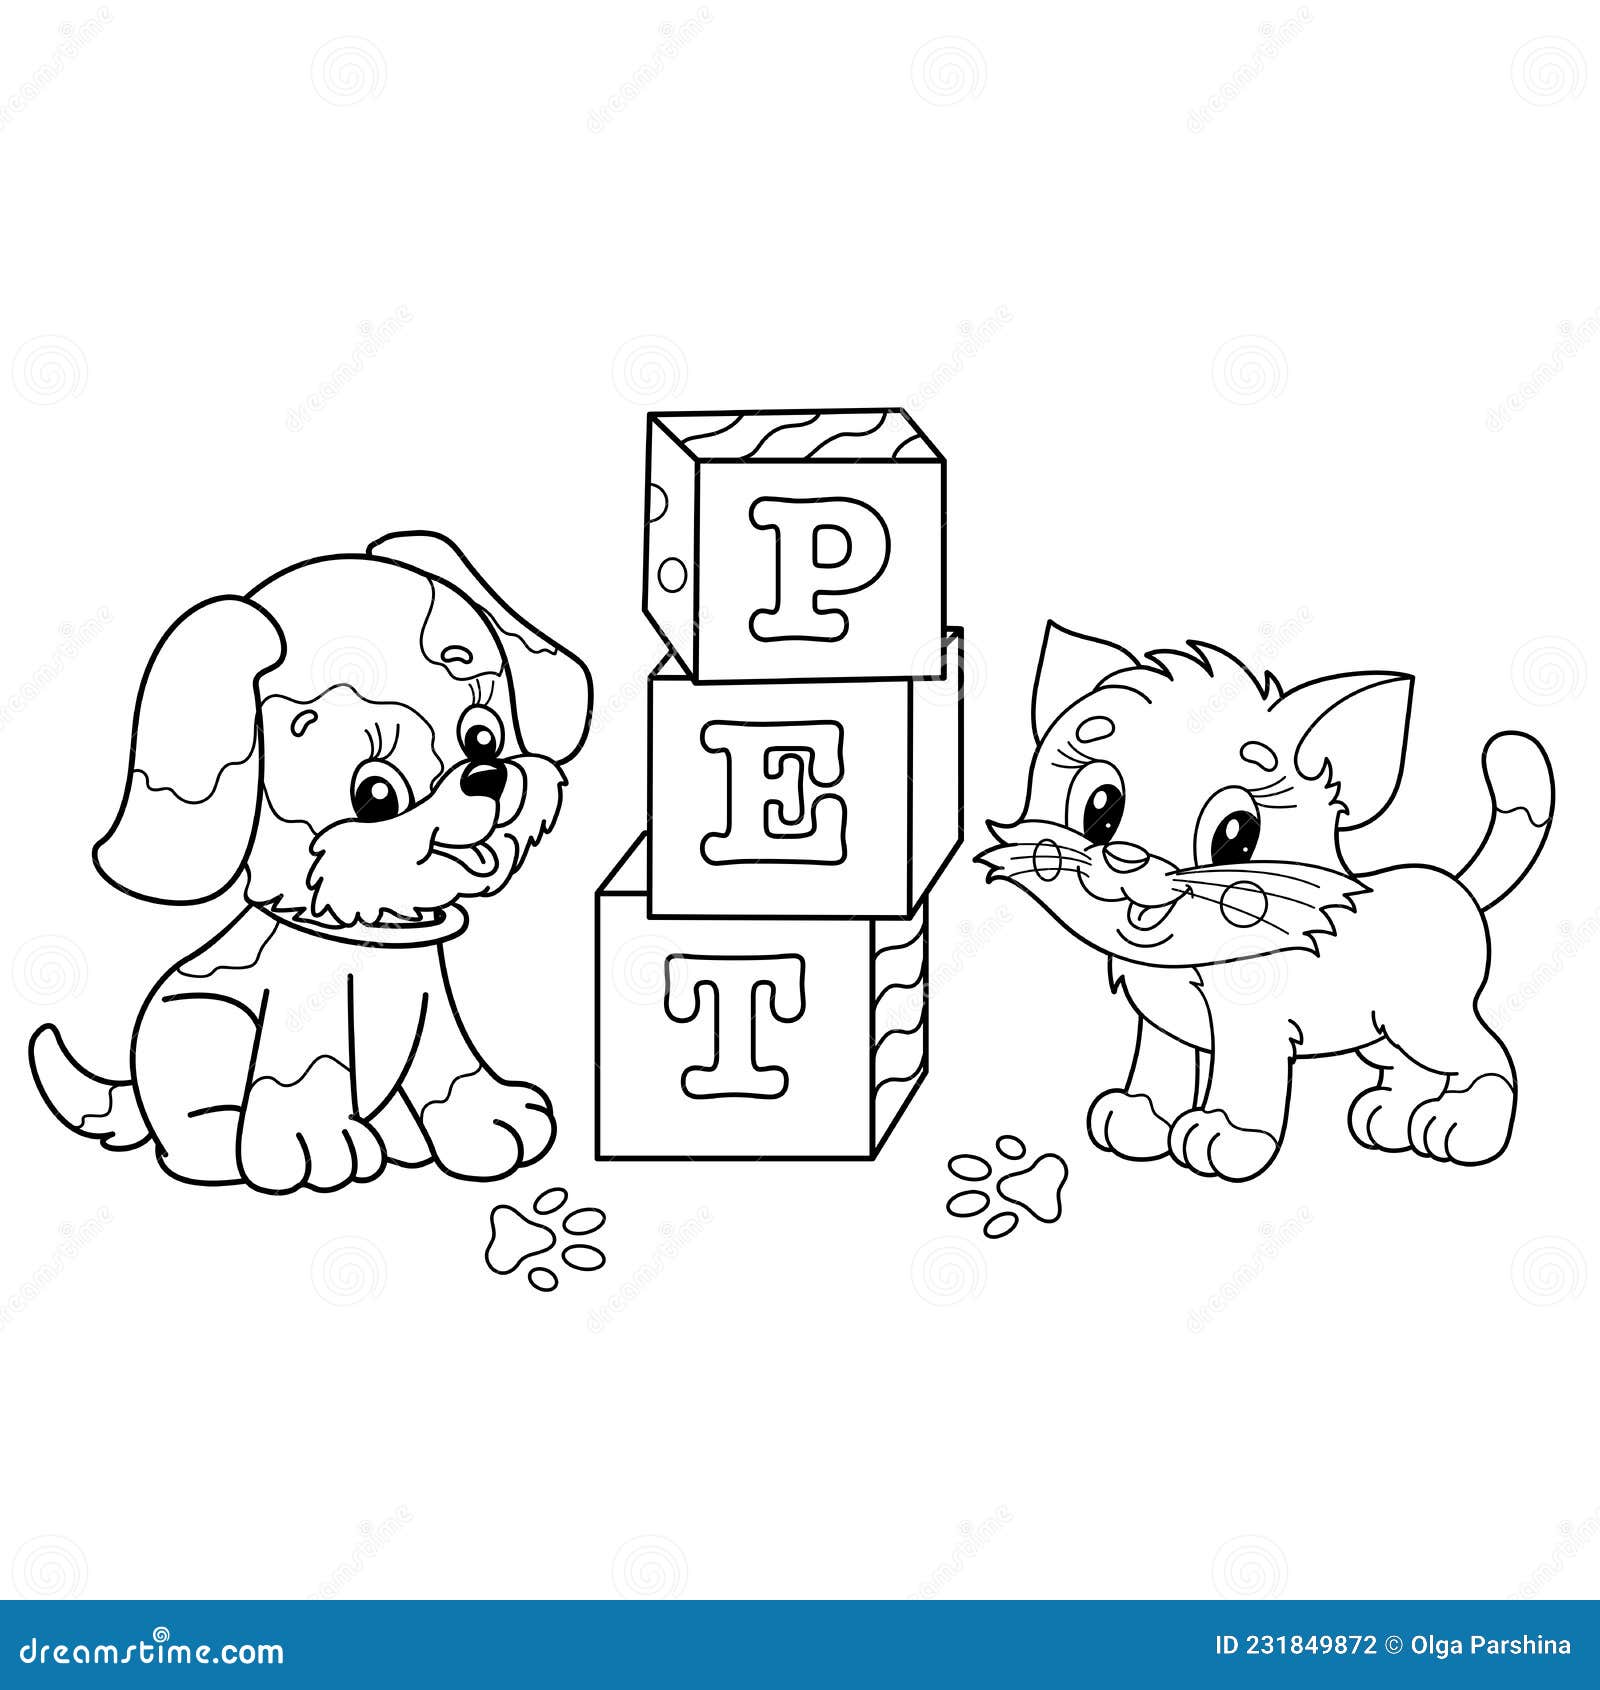 Coloring page outline of cartoon little dog and cat with toy cubes cute puppy and kitten pets stock vector